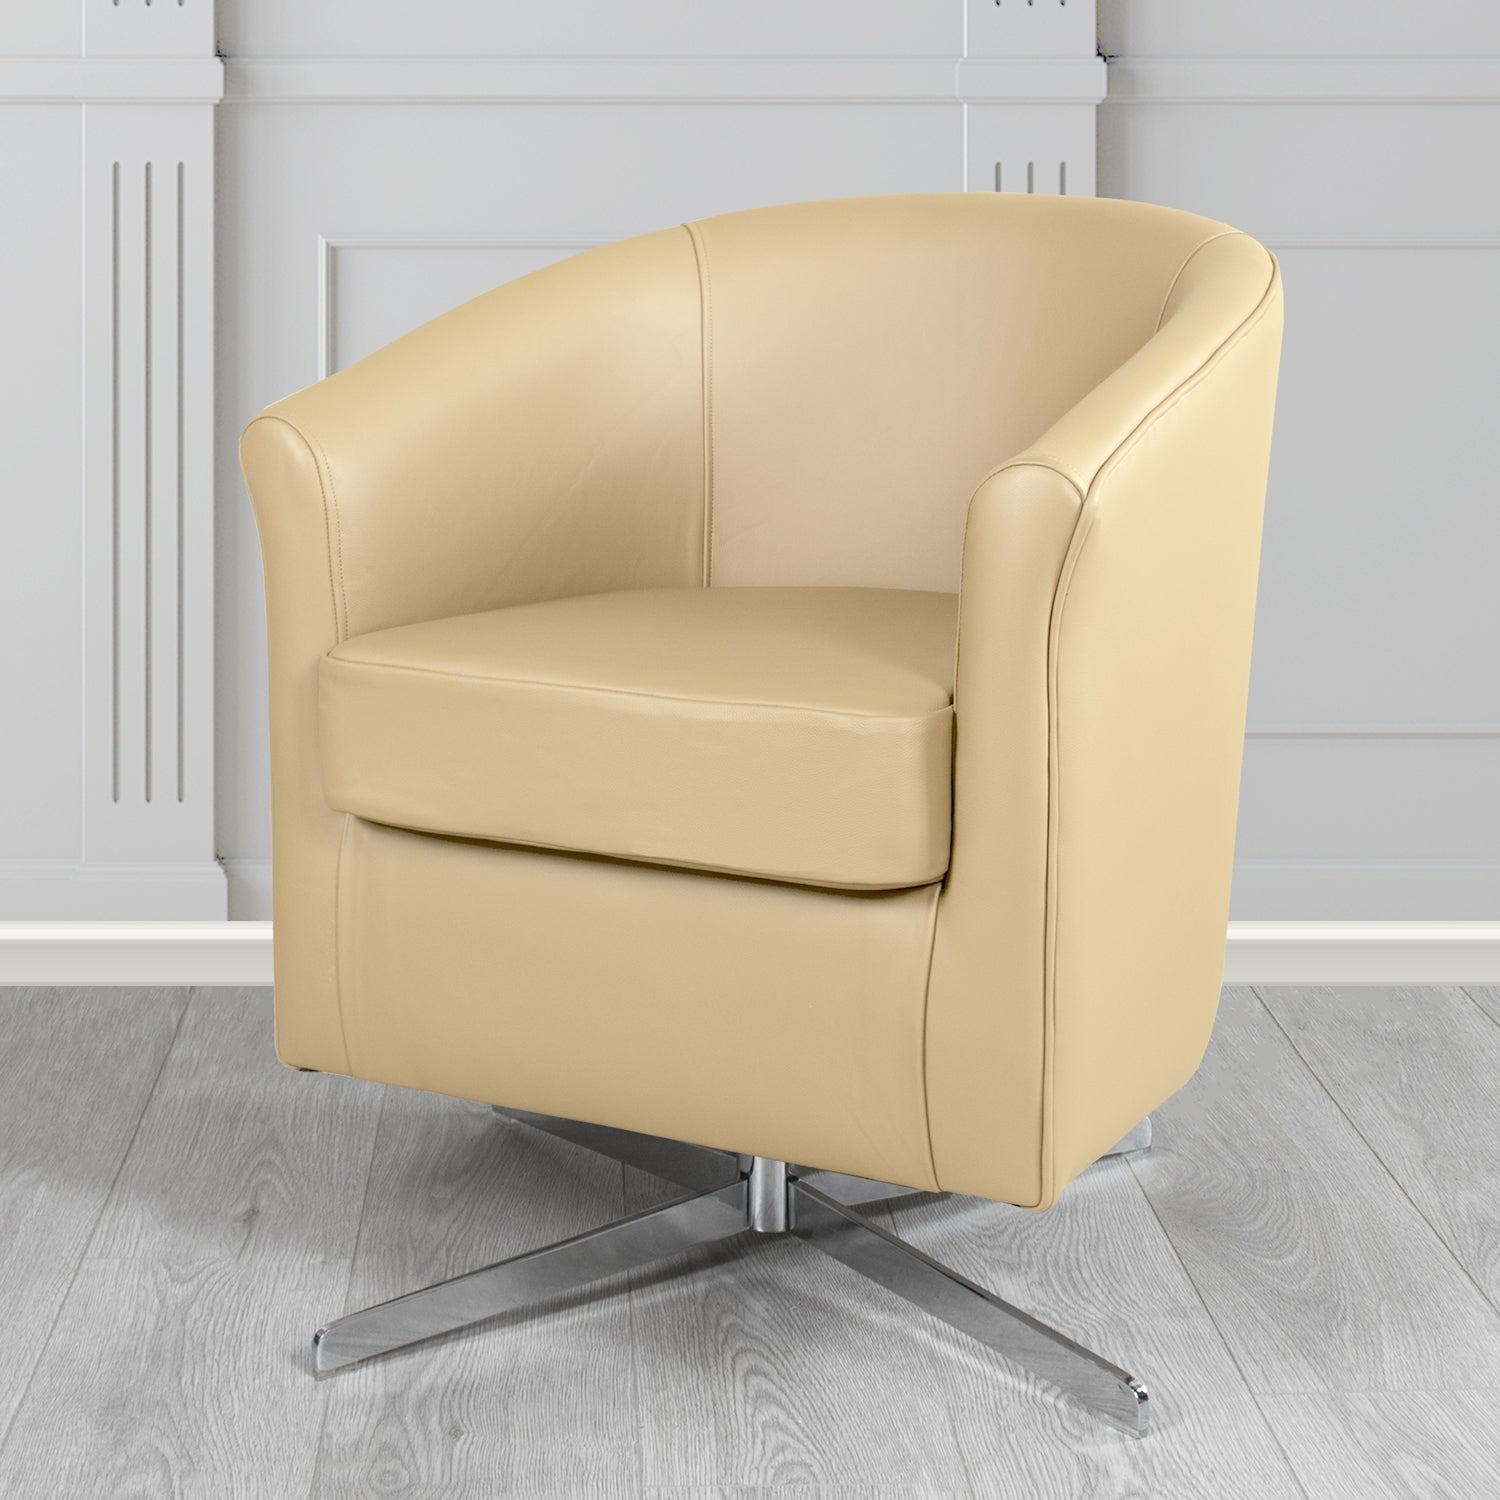 Cannes Swivel Tub Chair in Shelly Stone Crib 5 Genuine Leather - The Tub Chair Shop